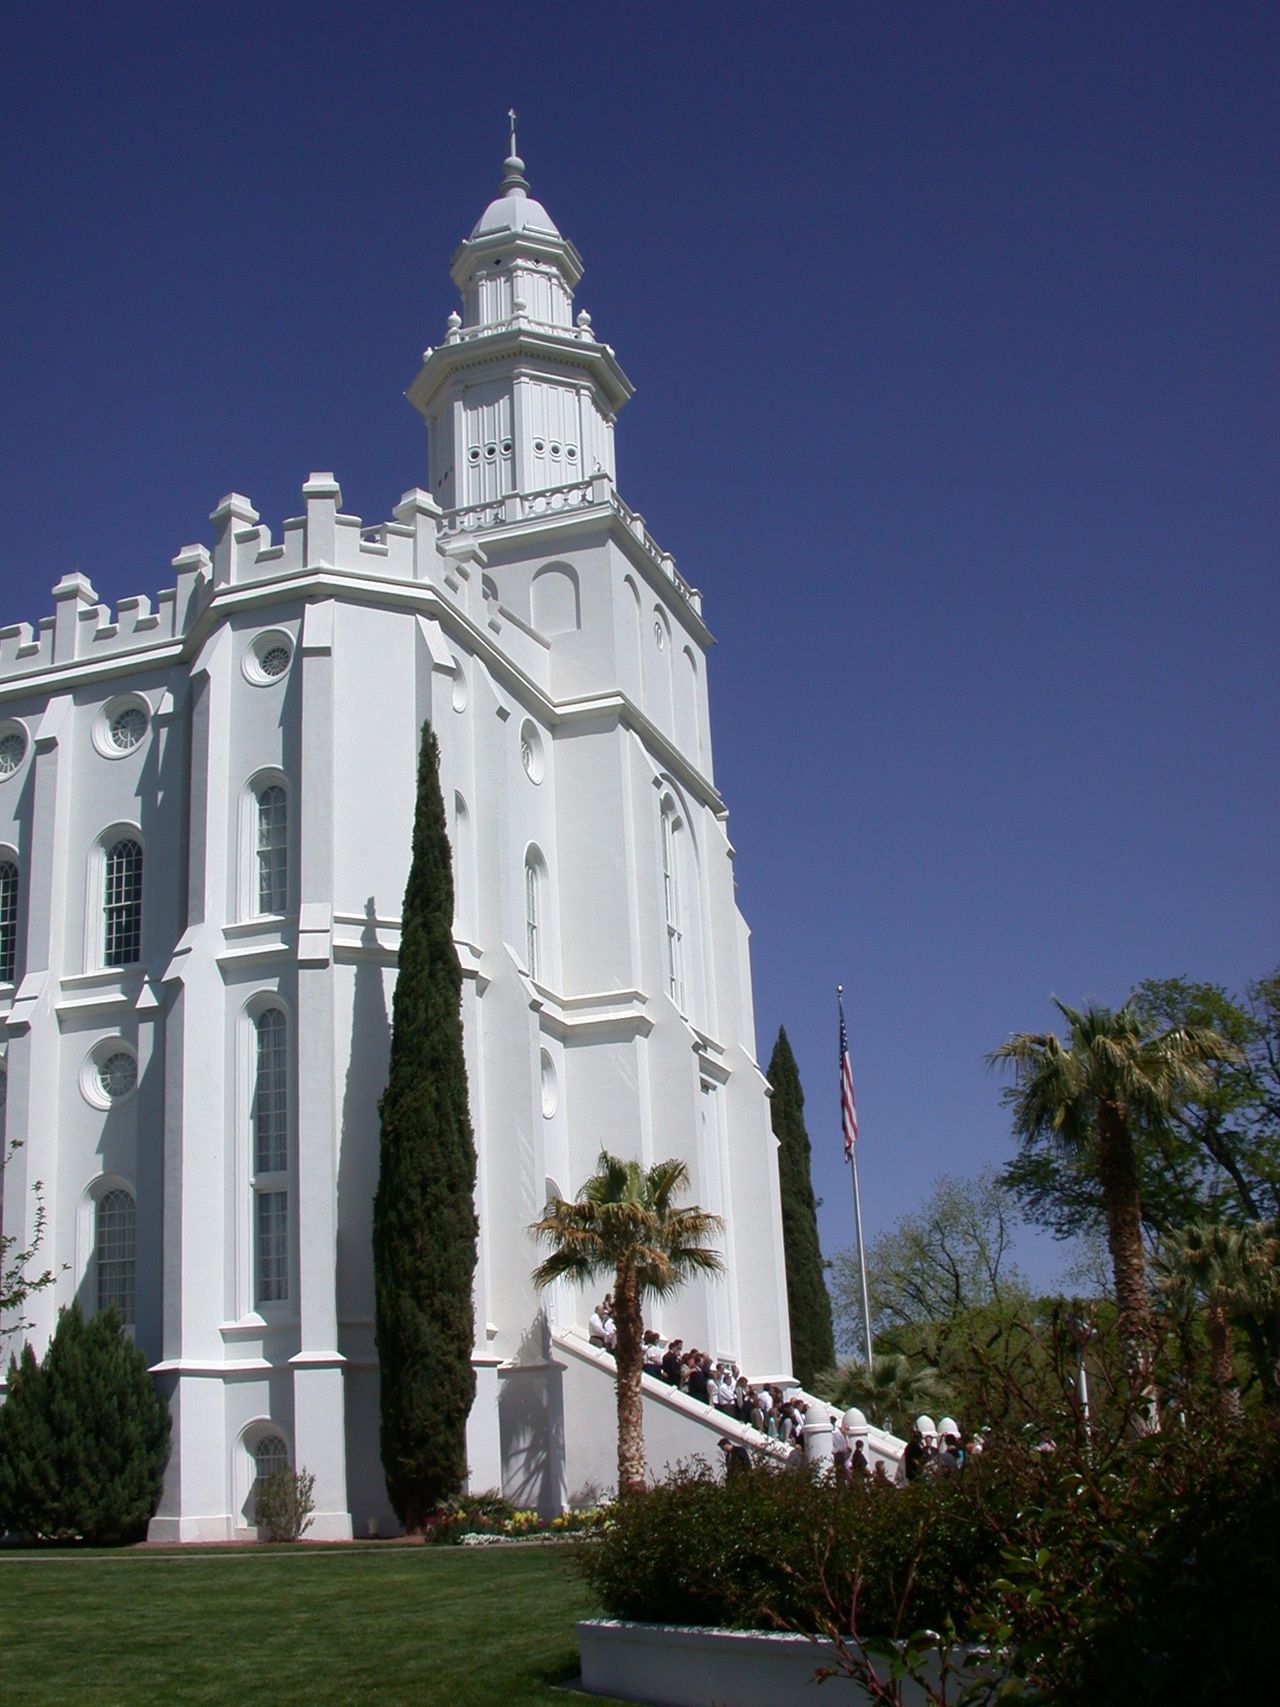 The St. George Utah Temple south side, including scenery.